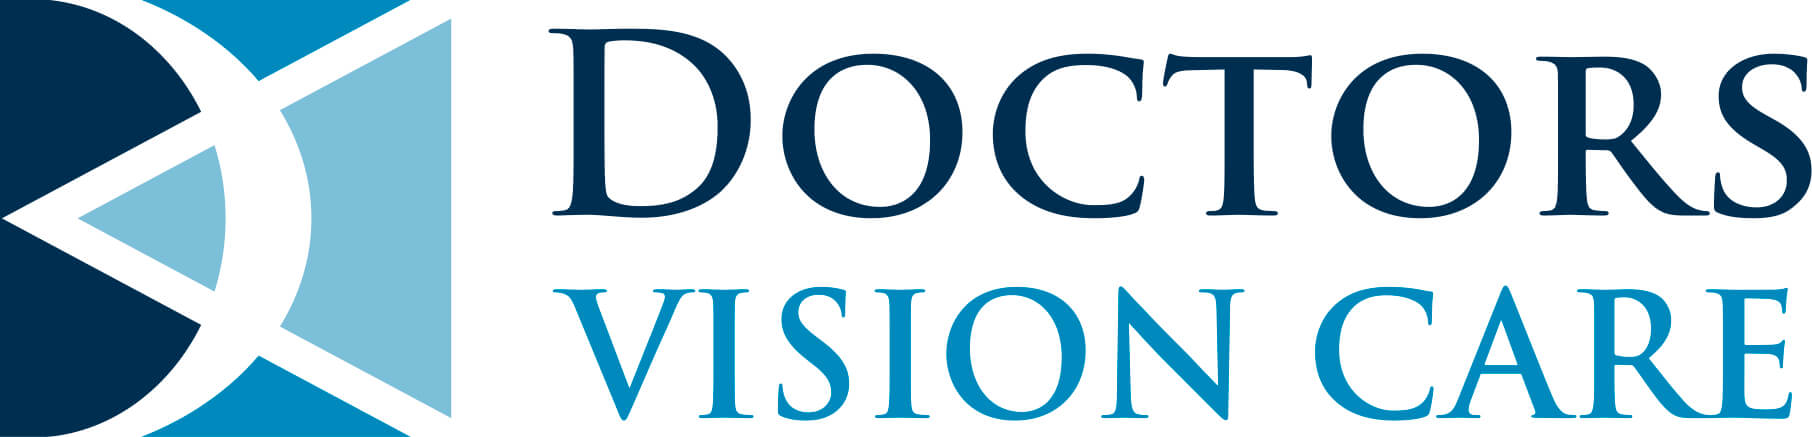 Doctors Vision Care